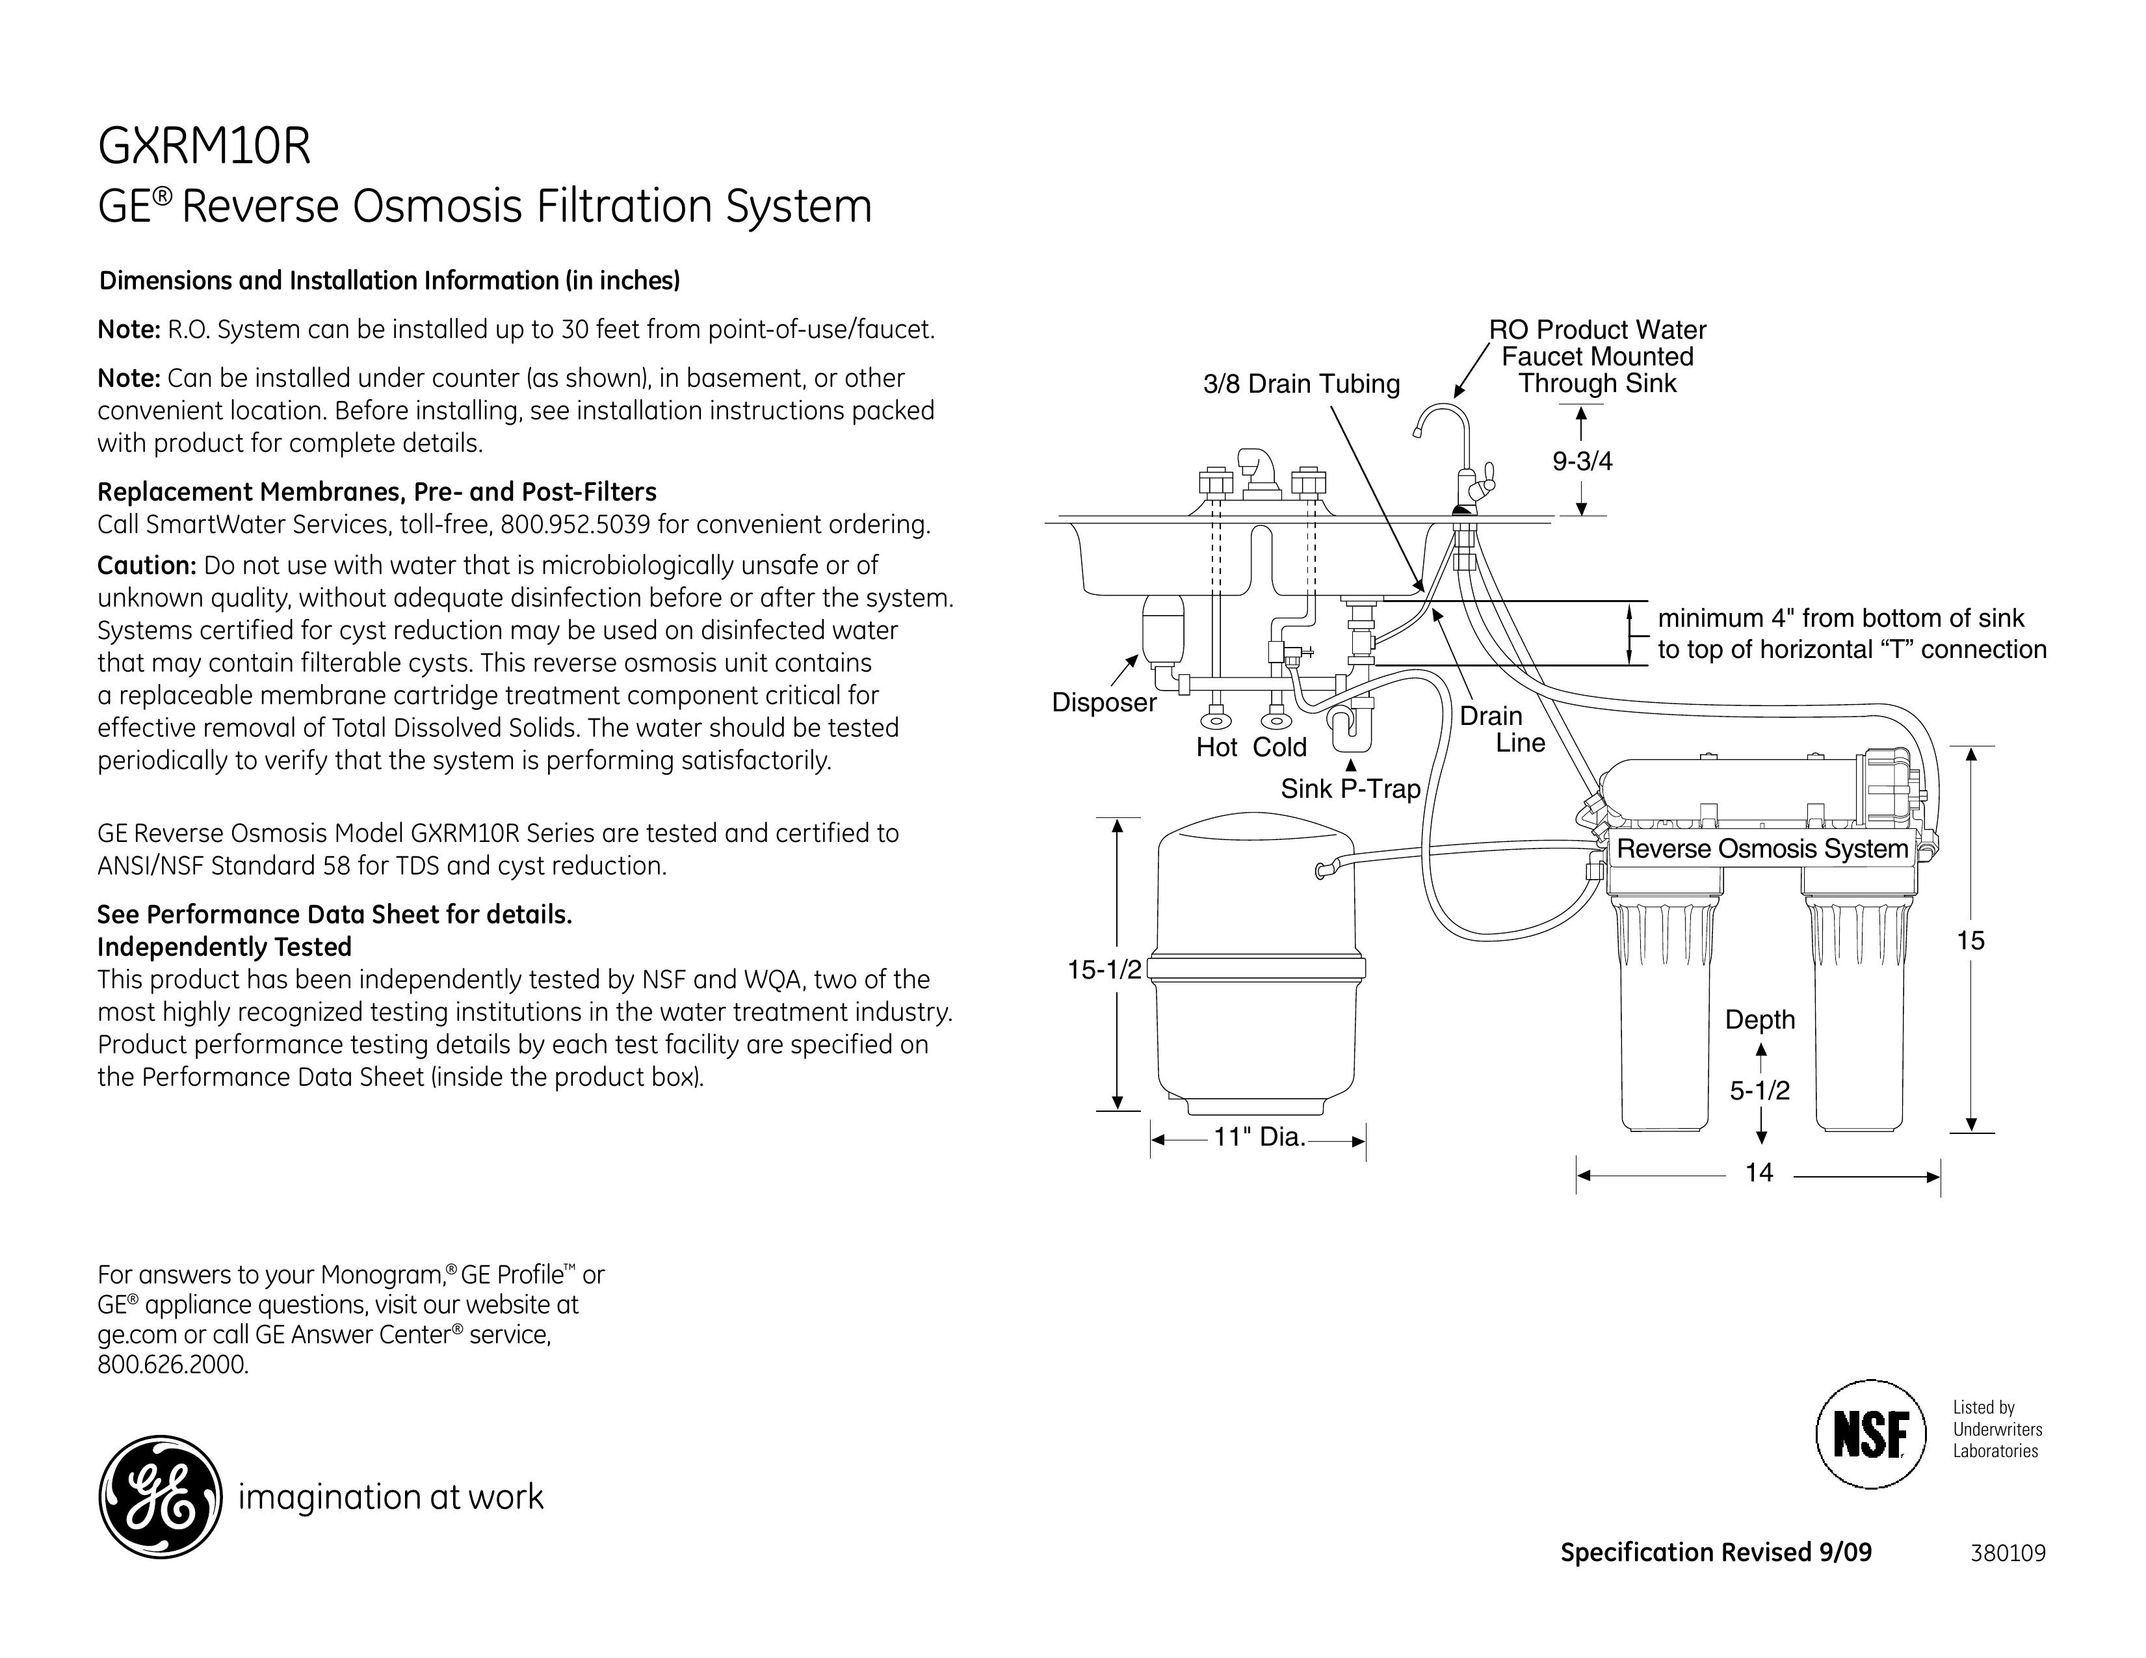 GE GXRM10R Water System User Manual